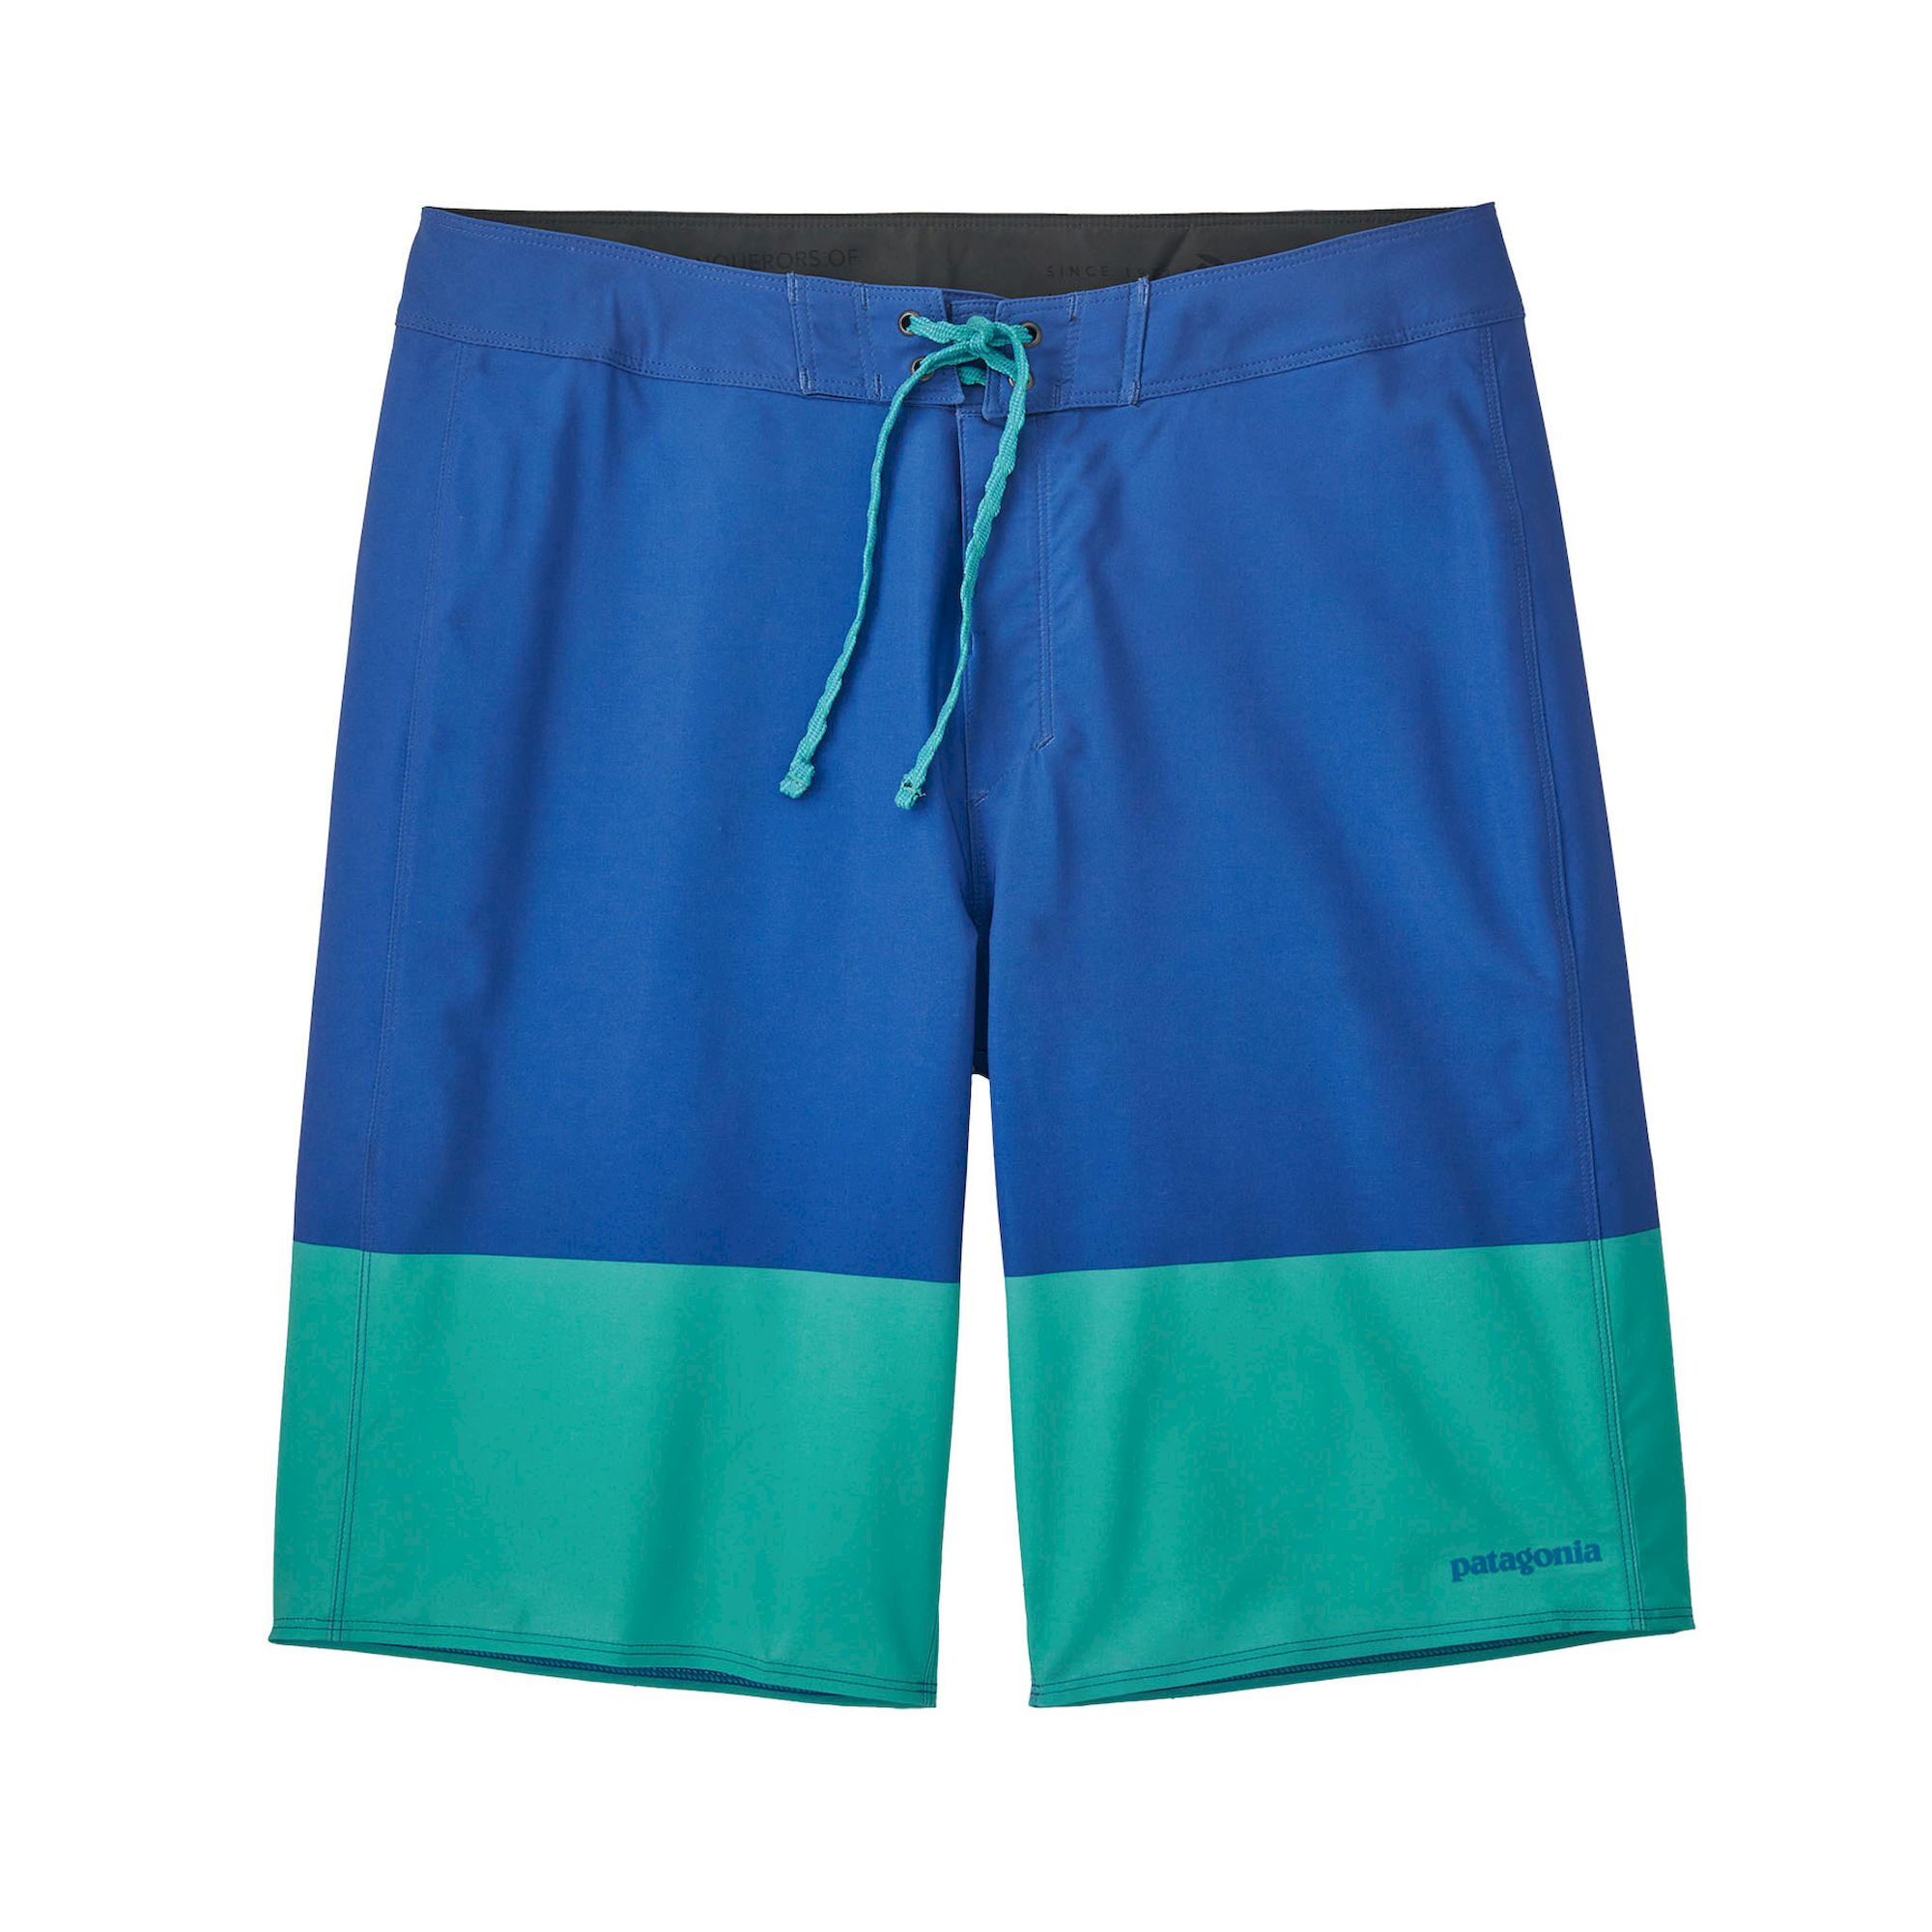 Patagonia Hydropeak Boardshorts - 21 in. - Hombre